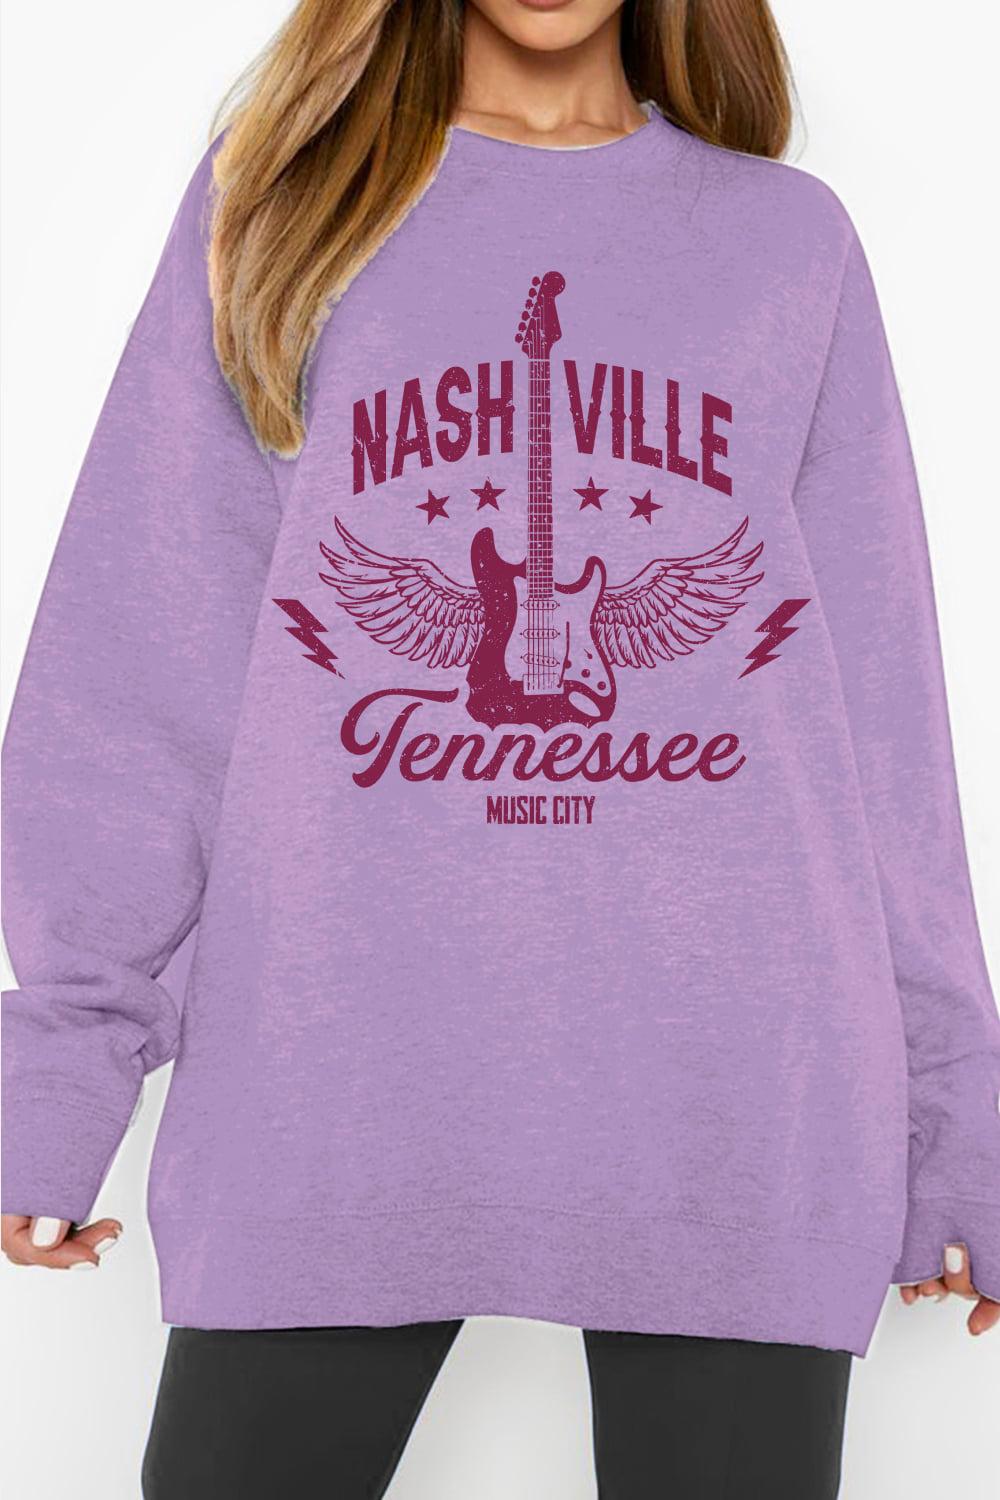 Simply Love Full Size NASHVILLE TENNESSEE MUSIC CITY Graphic Sweatshirt BLUE ZONE PLANET